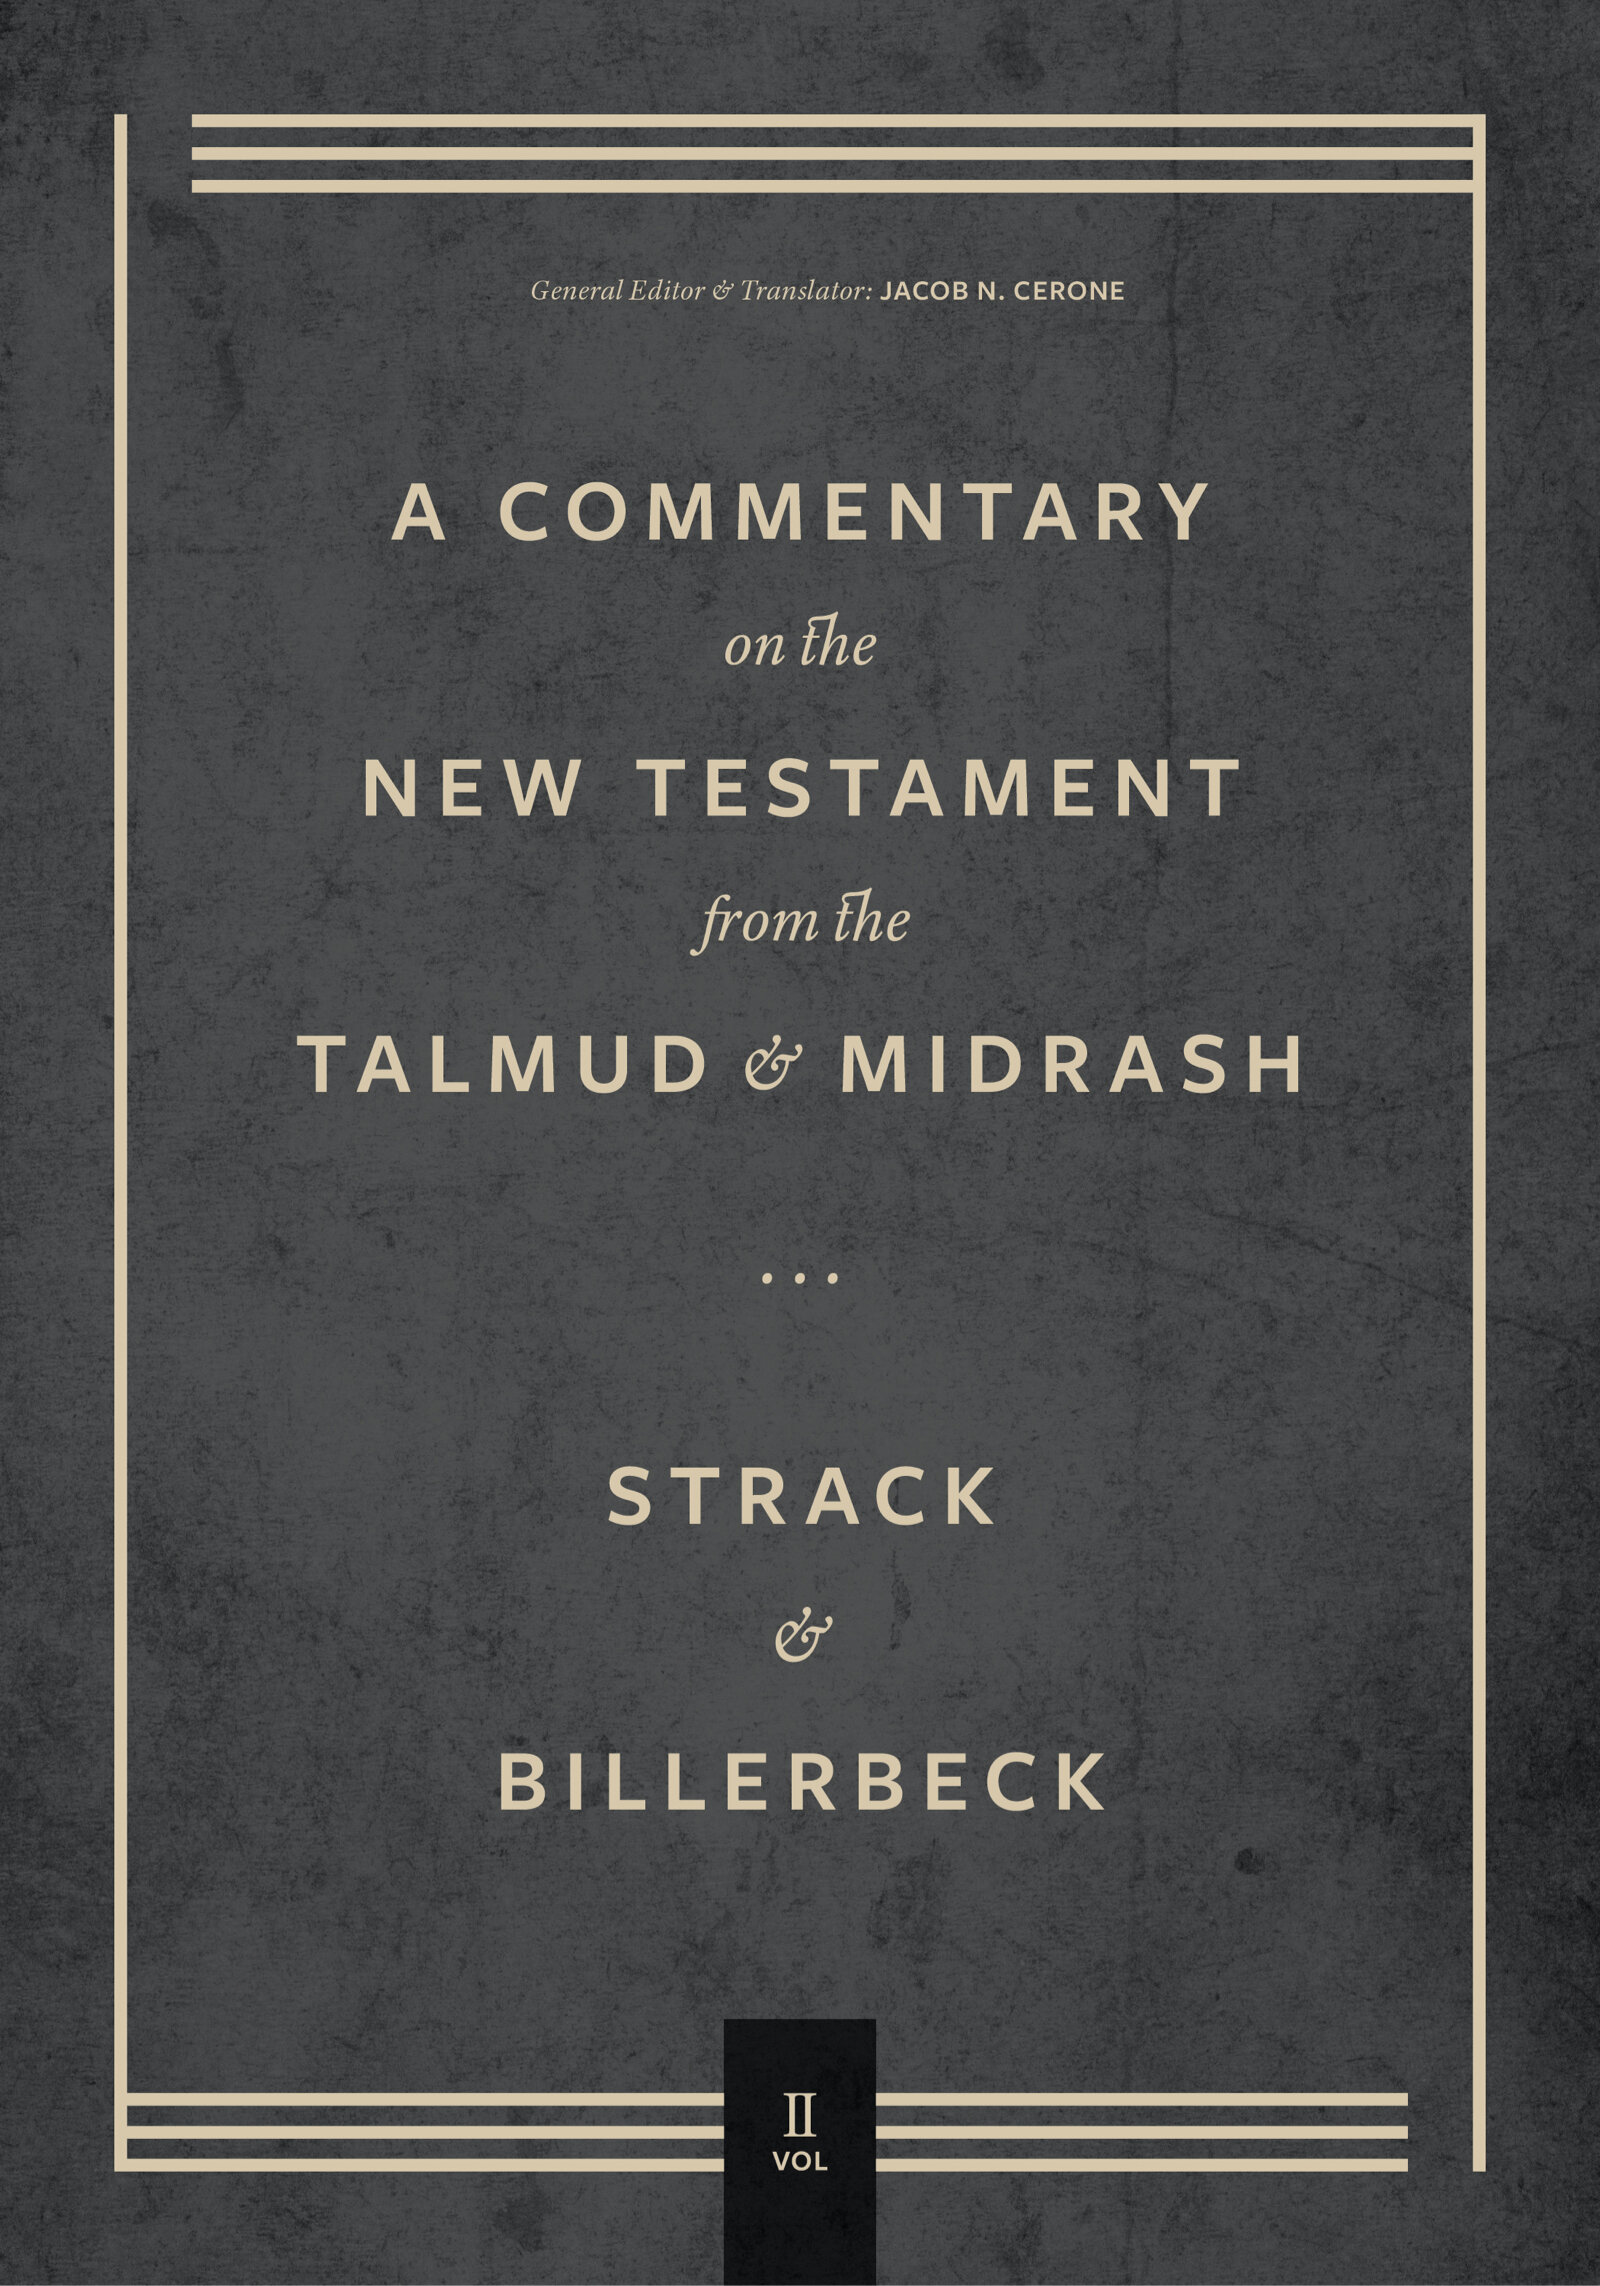 A Commentary on the New Testament from the Talmud & Midrash by Strack & Billerbeck